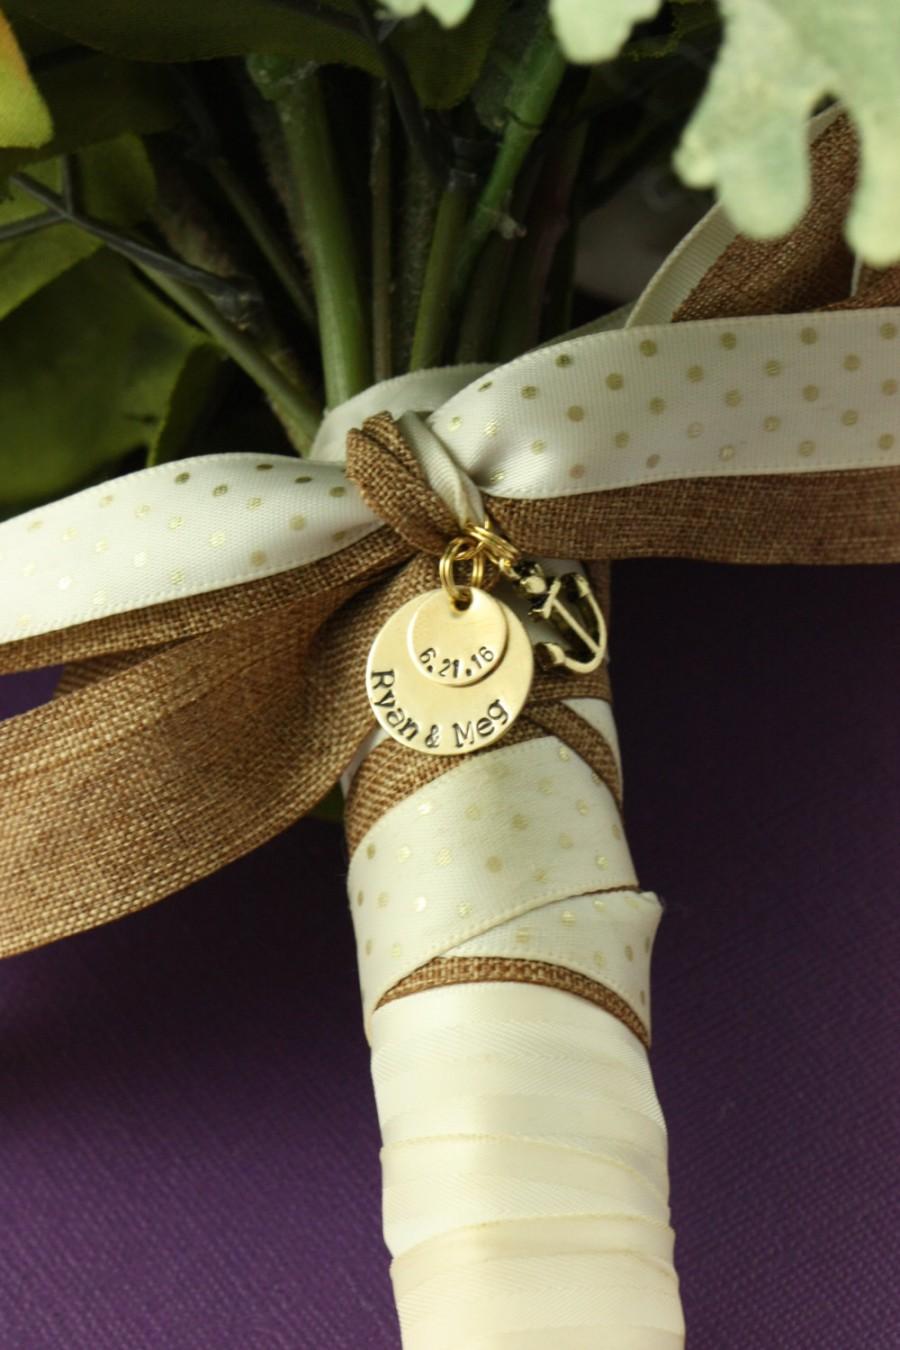 Wedding - SALE - Wedding Bouquet Charm - Custom Name Date Bouquet Charm - Gold Anchor - Gift for Bride - Bridal Shower Gift - Gift for Her - Wedding